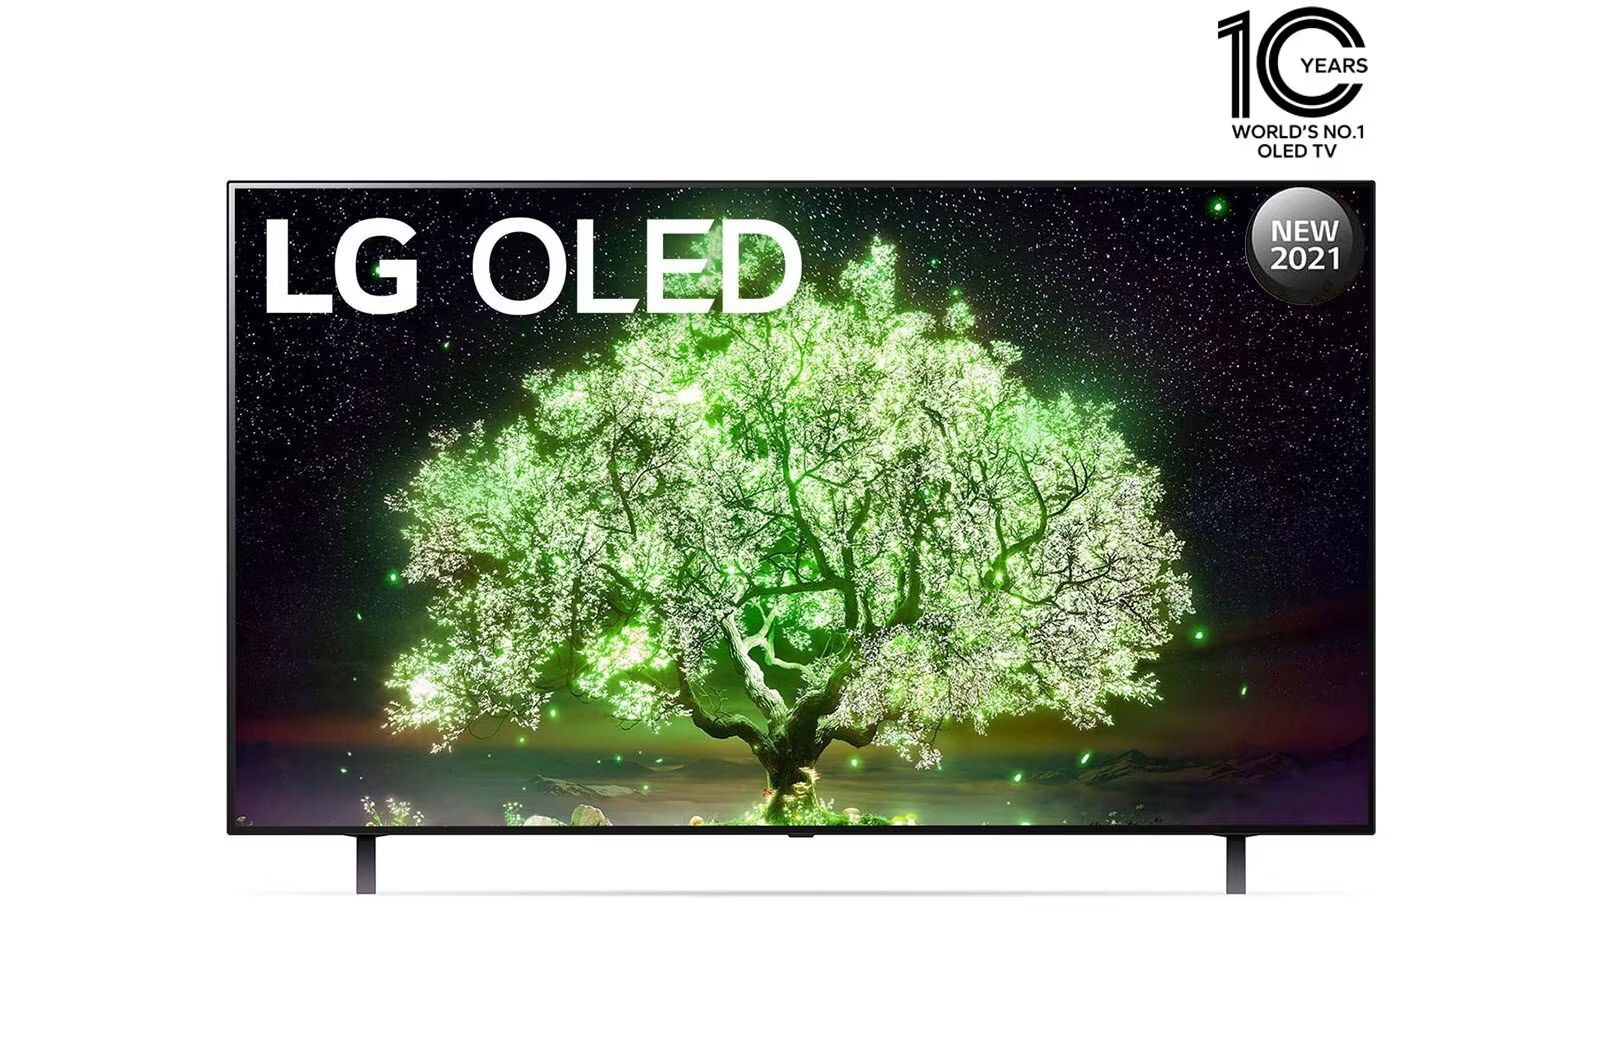 how-to-turn-off-voice-on-lg-oled-tv